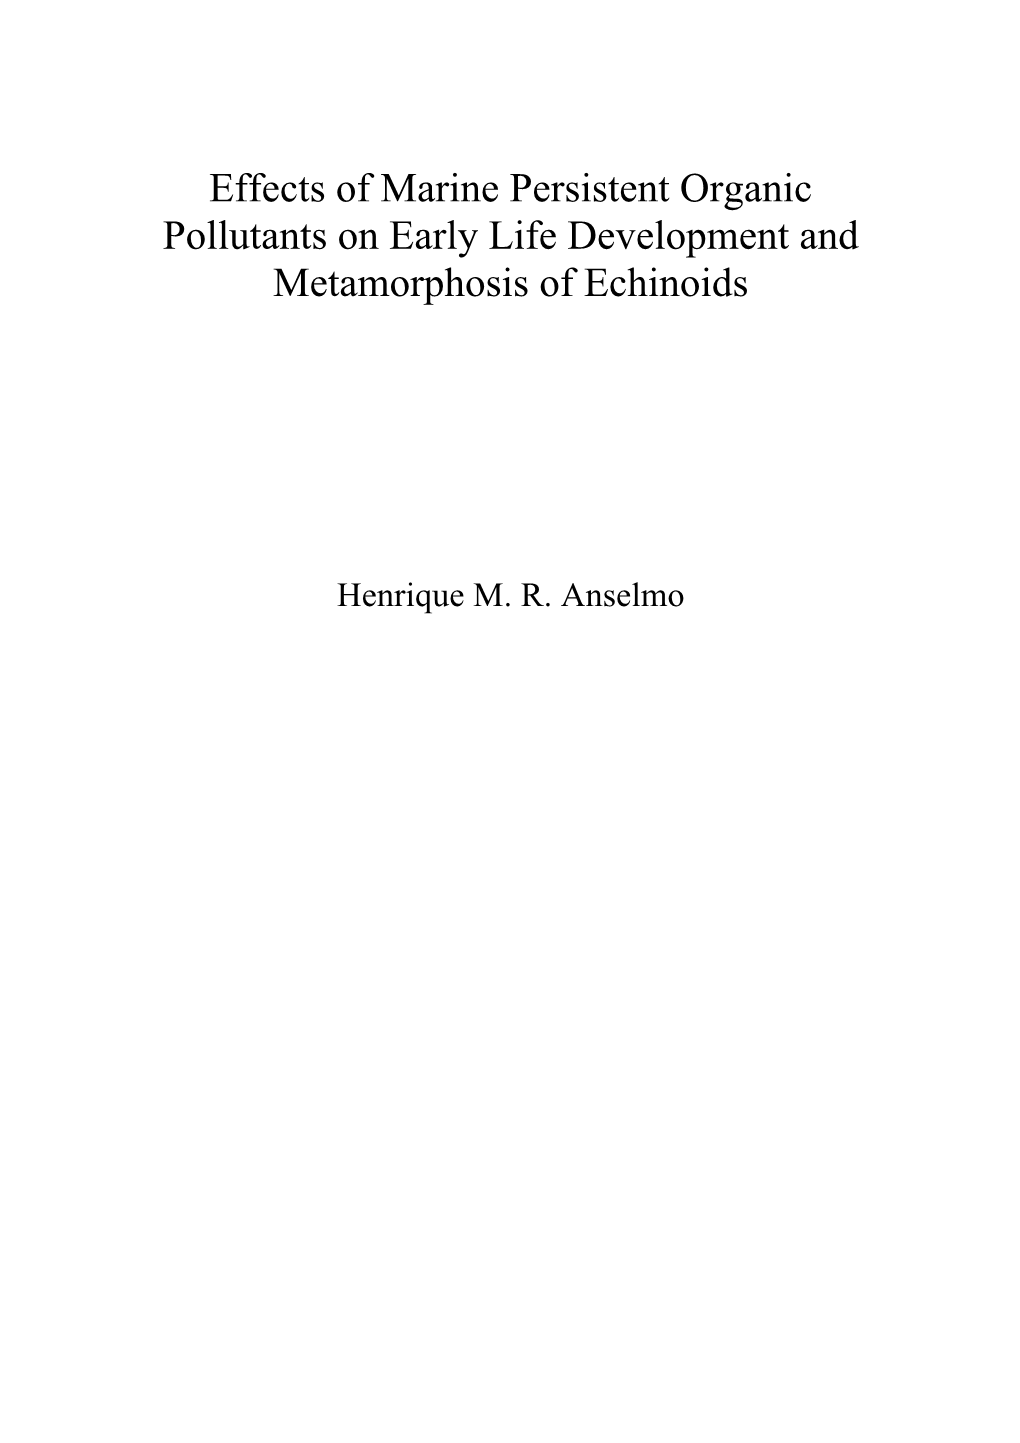 Effects of Marine Persistent Organic Pollutants on Early Life Development and Metamorphosis of Echinoids